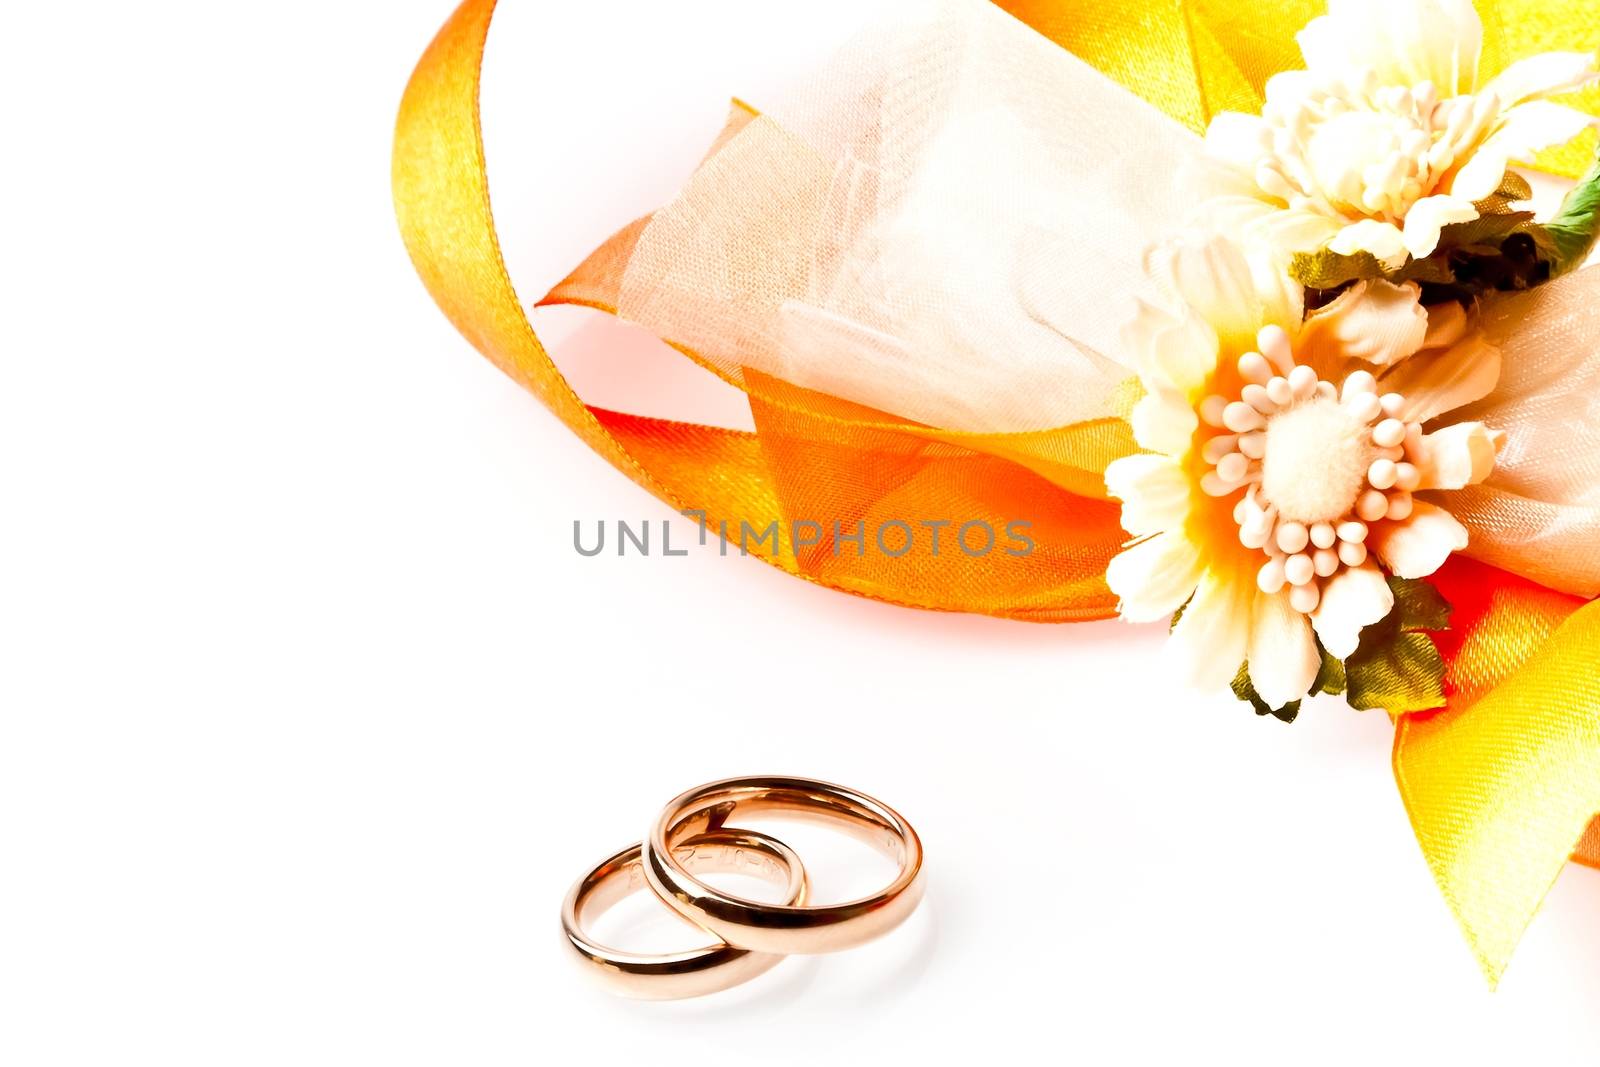 gold wedding rings near ribbon and flowers with space for text on white background